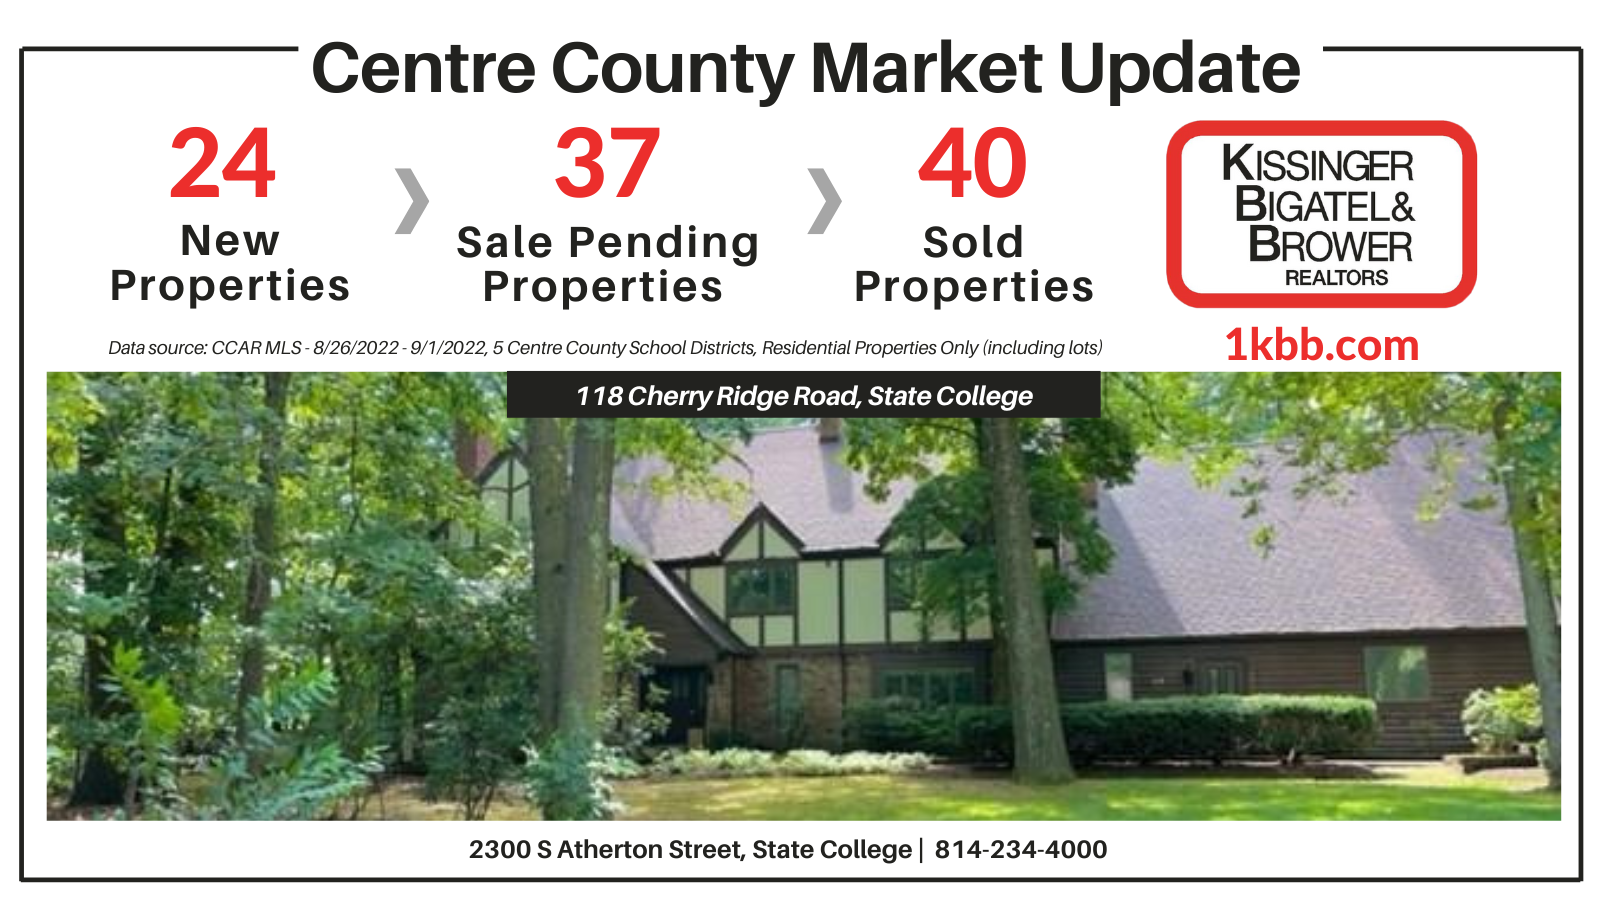 Market Update Report for 8/26-9/1/2022 in Centre County, PA